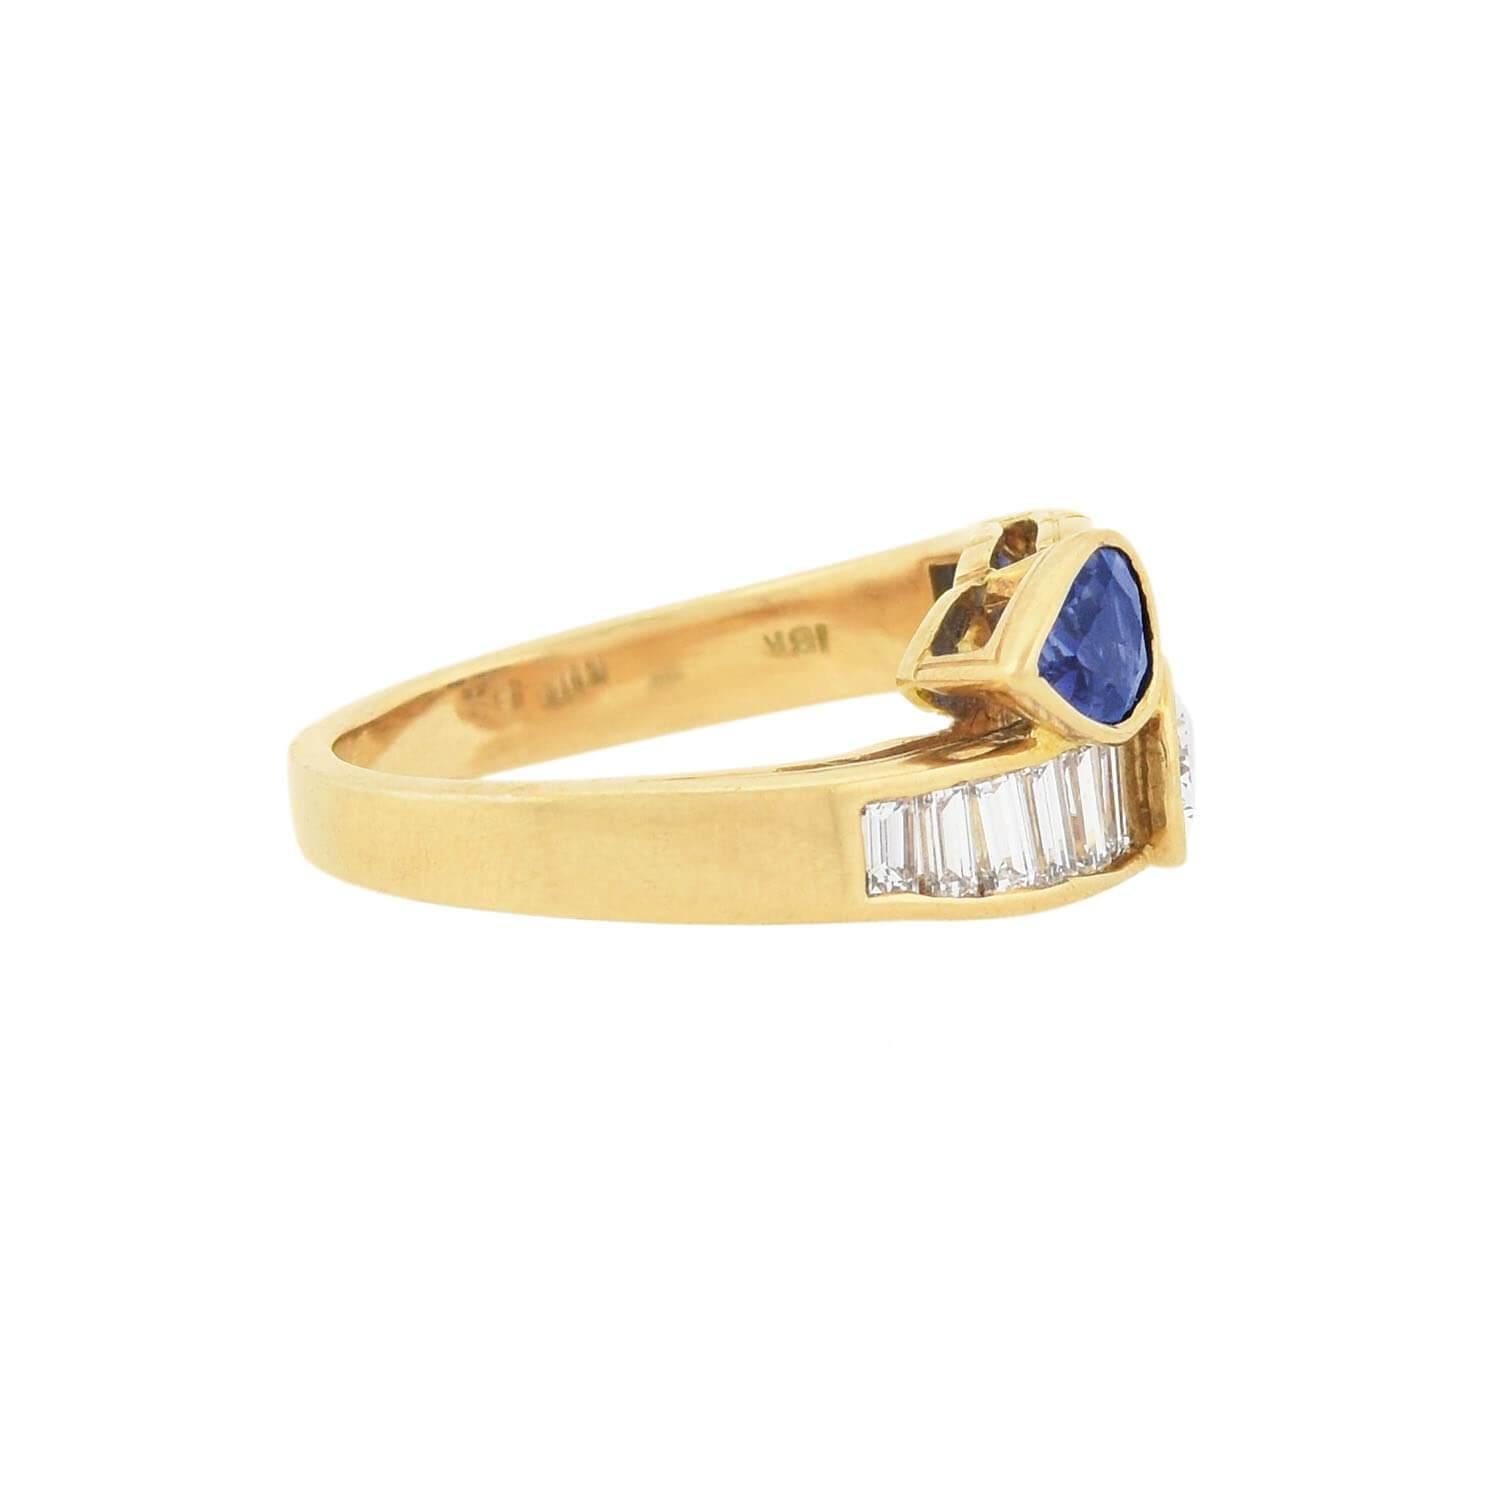 This beautiful vintage ring from the 1960s is a designer piece signed by Oscar Heyman! Crafted in 18kt gold, the ring features a row of diamonds and sapphires nestled together, forming a stylish bypass design. Two pear cut stones rest at the center,